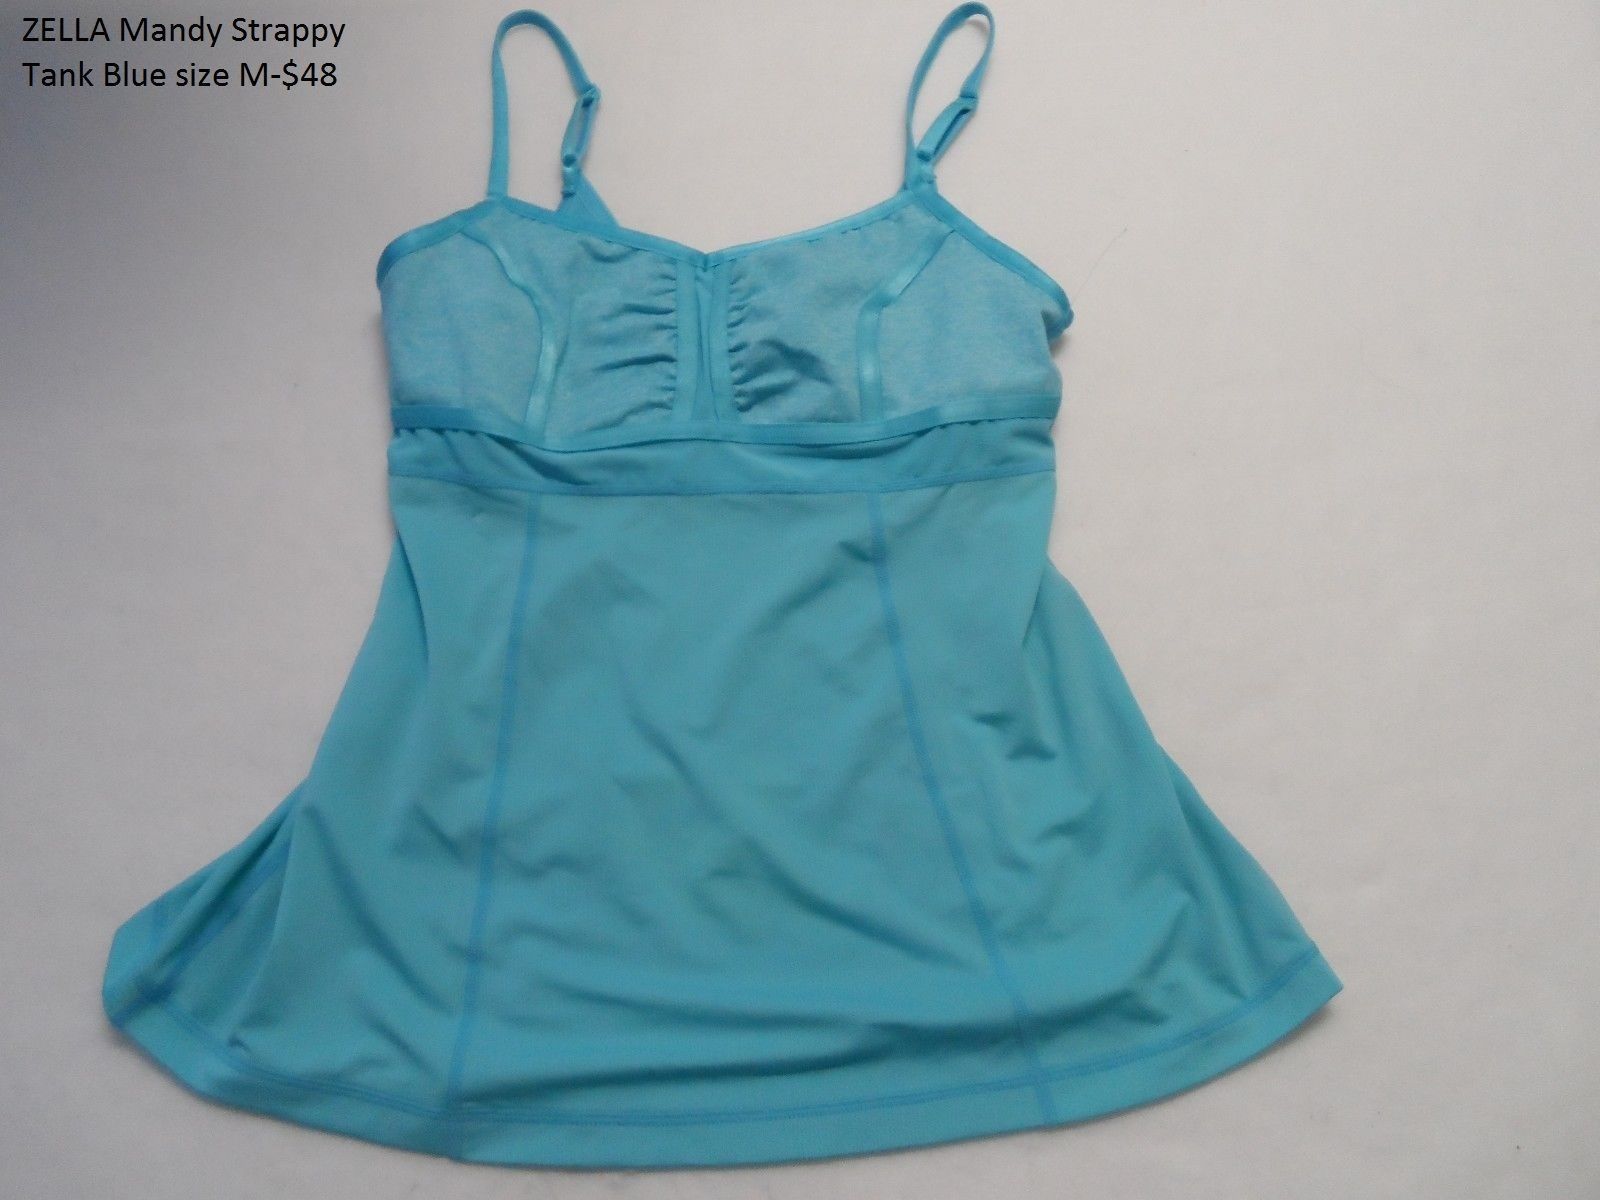 Primary image for ZELLA Mandy Strappy Tank Blue size M-$48